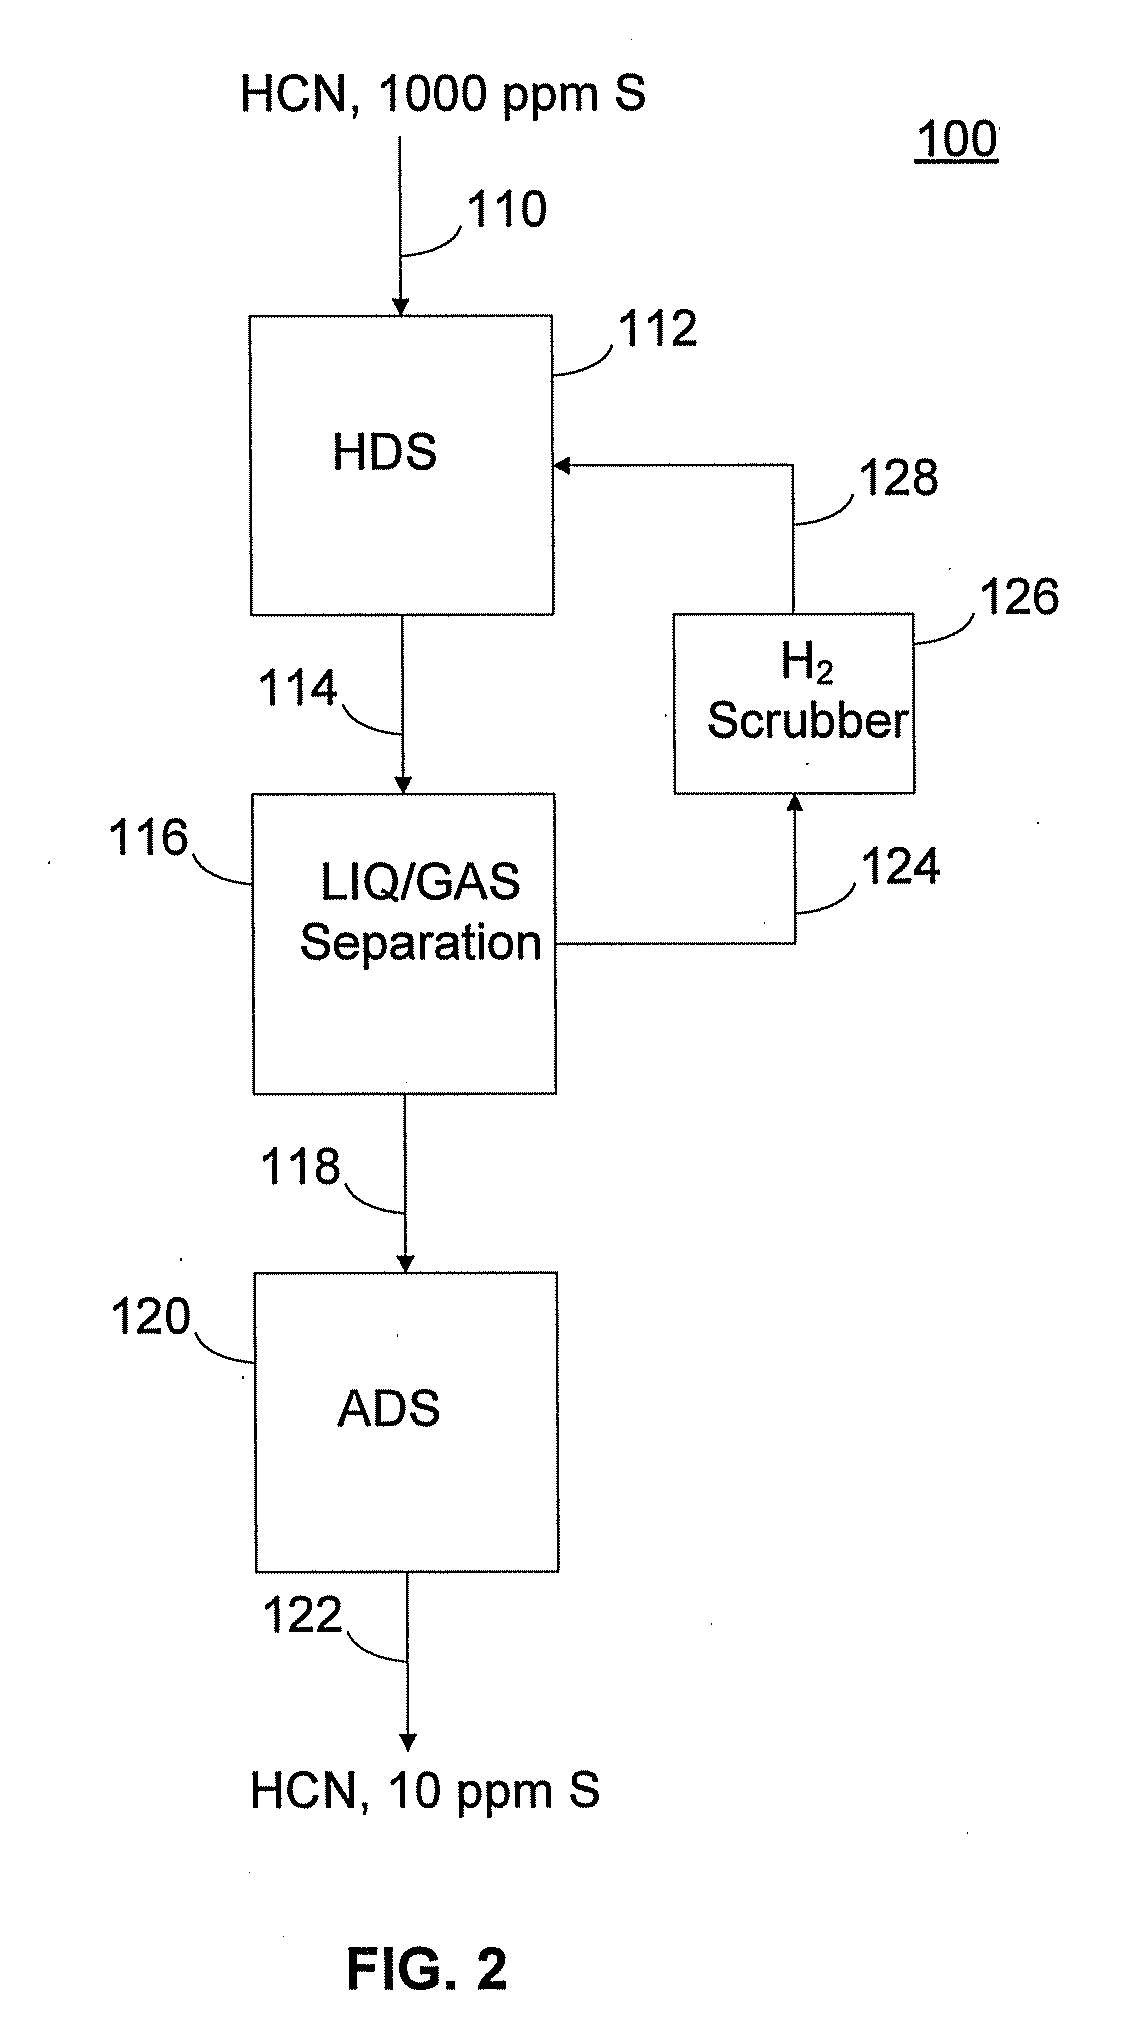 Process to produce low sulfur catalytically cracked gasoline without saturation of olefinic compounds